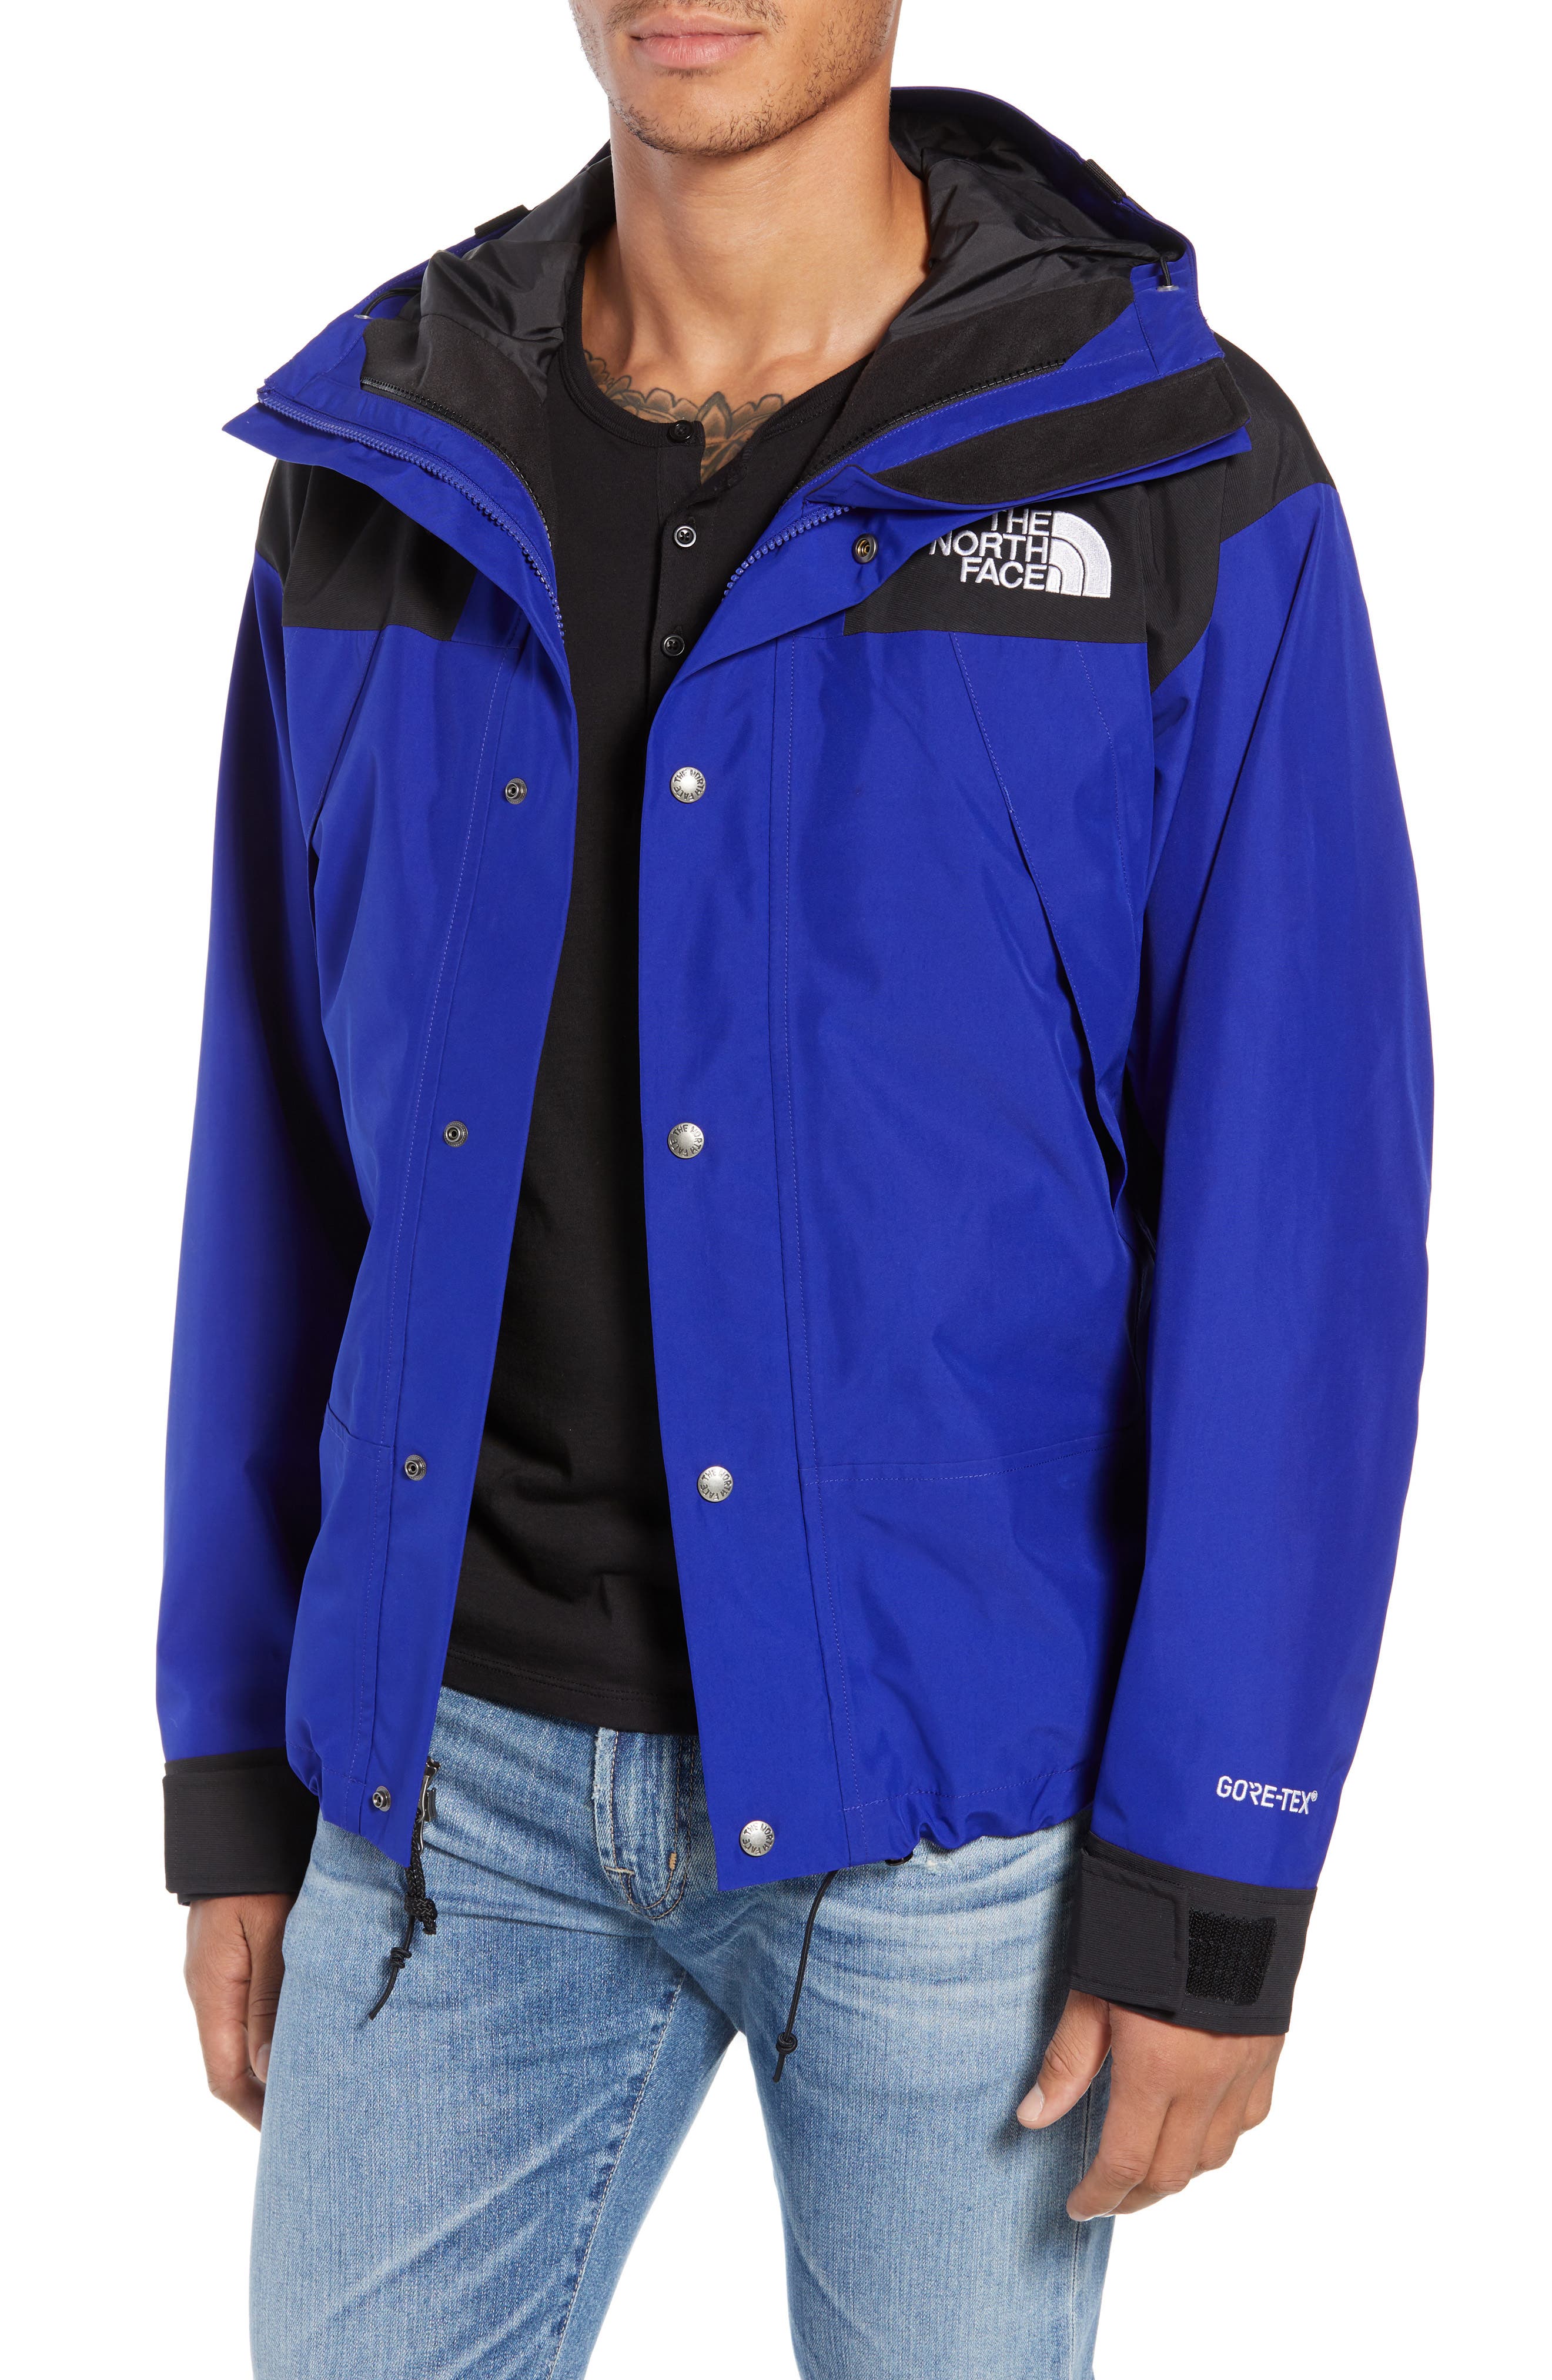 north face 1900 mountain jacket